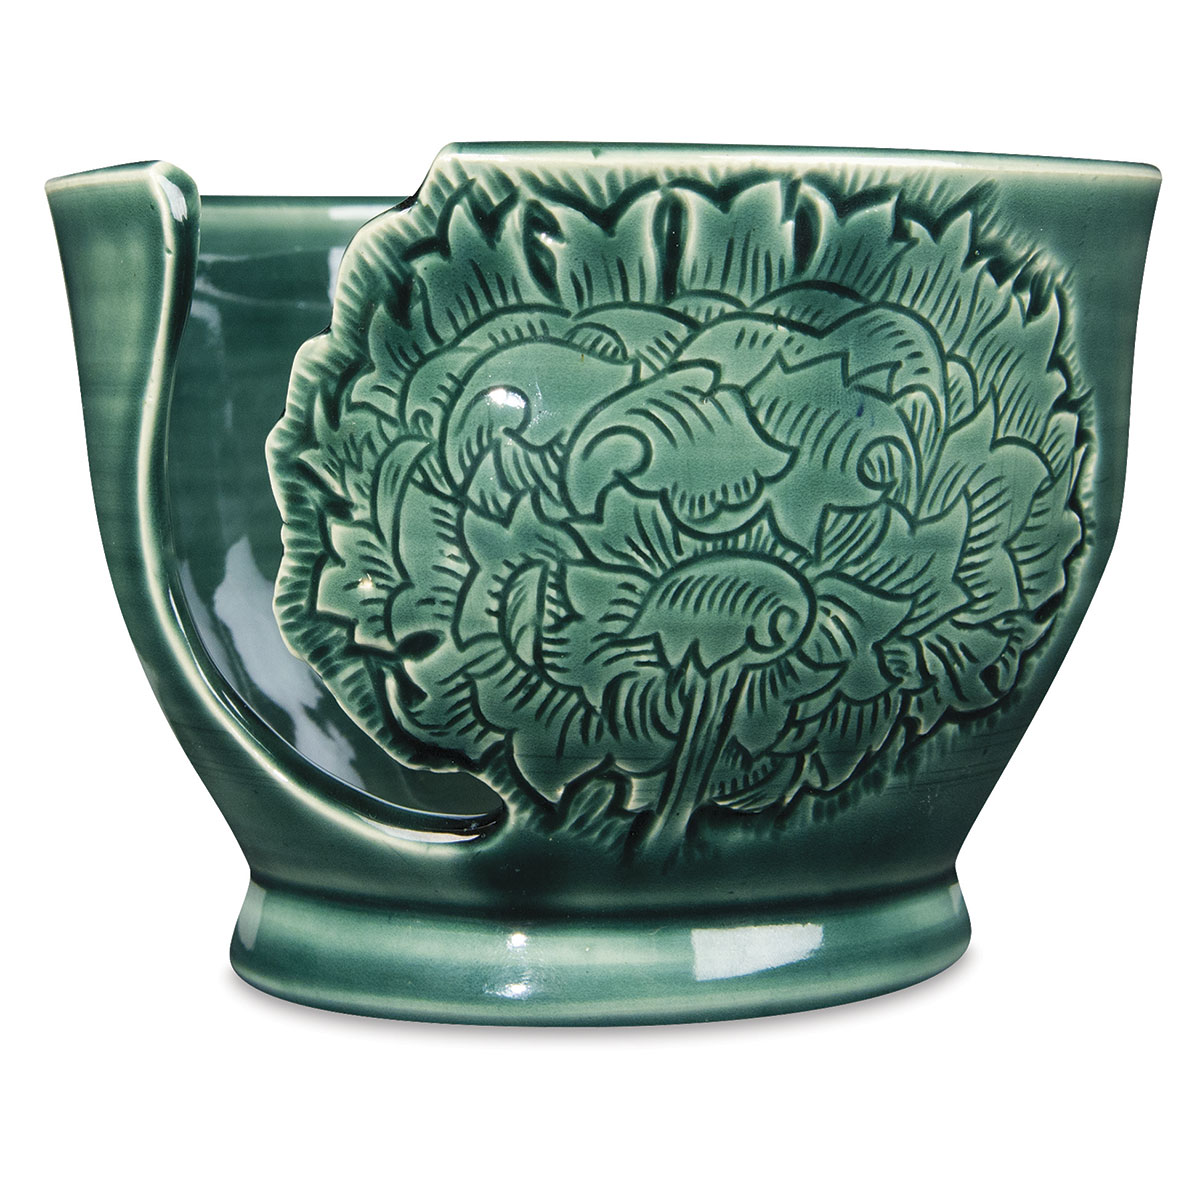 AMACO Celadons: We tested our popular Celadon glazes at cone 5, 6, and 7.  Nearly all of the Celadon line keep true to …